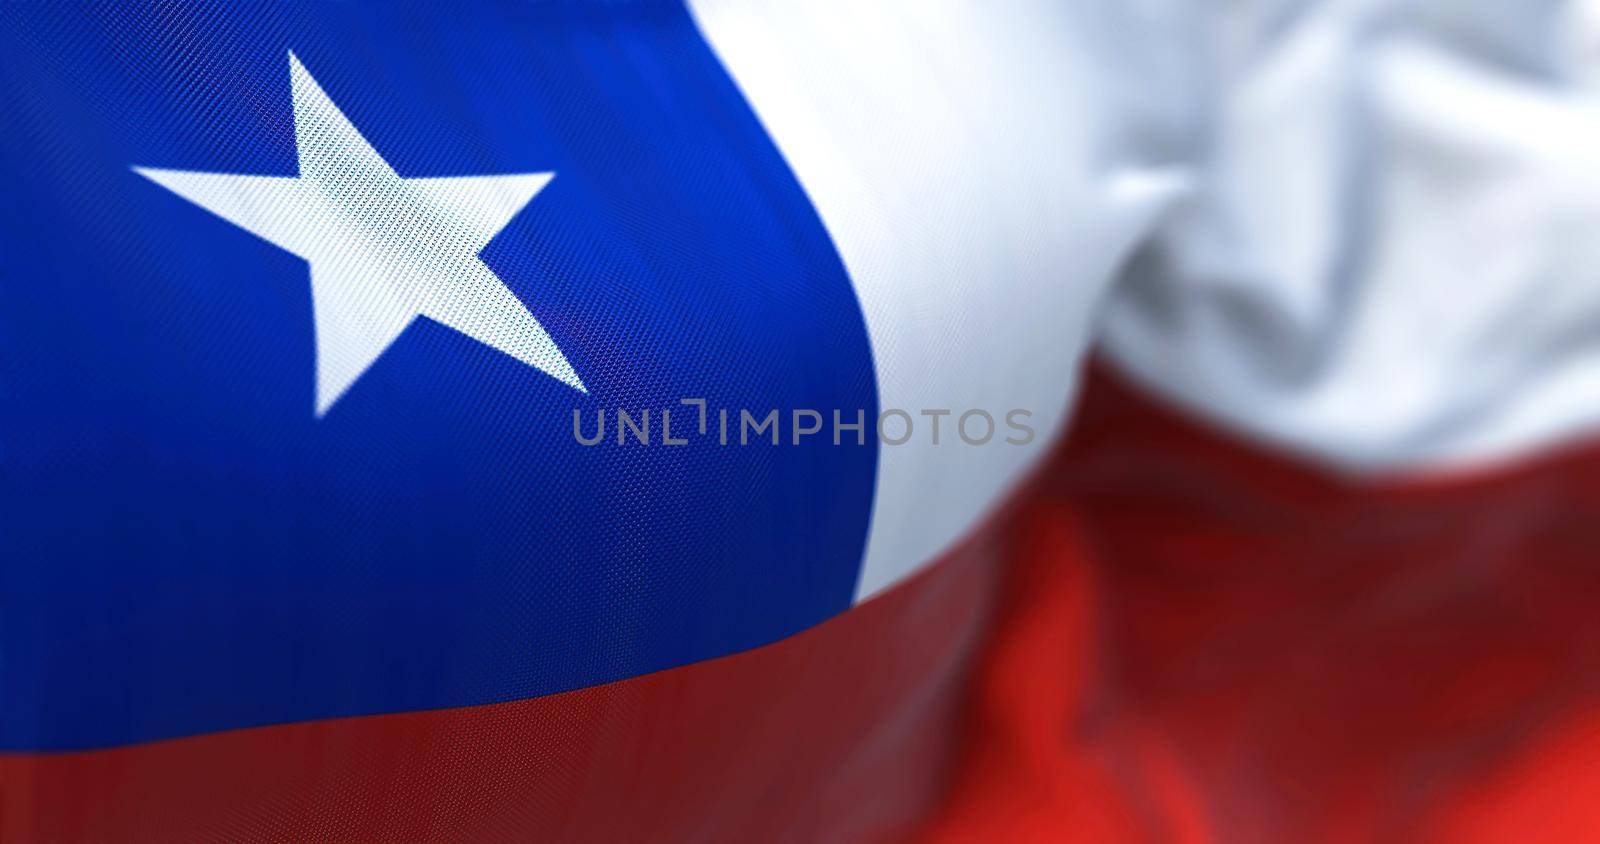 Close-up view of the Chile national flag waving in the wind by rarrarorro